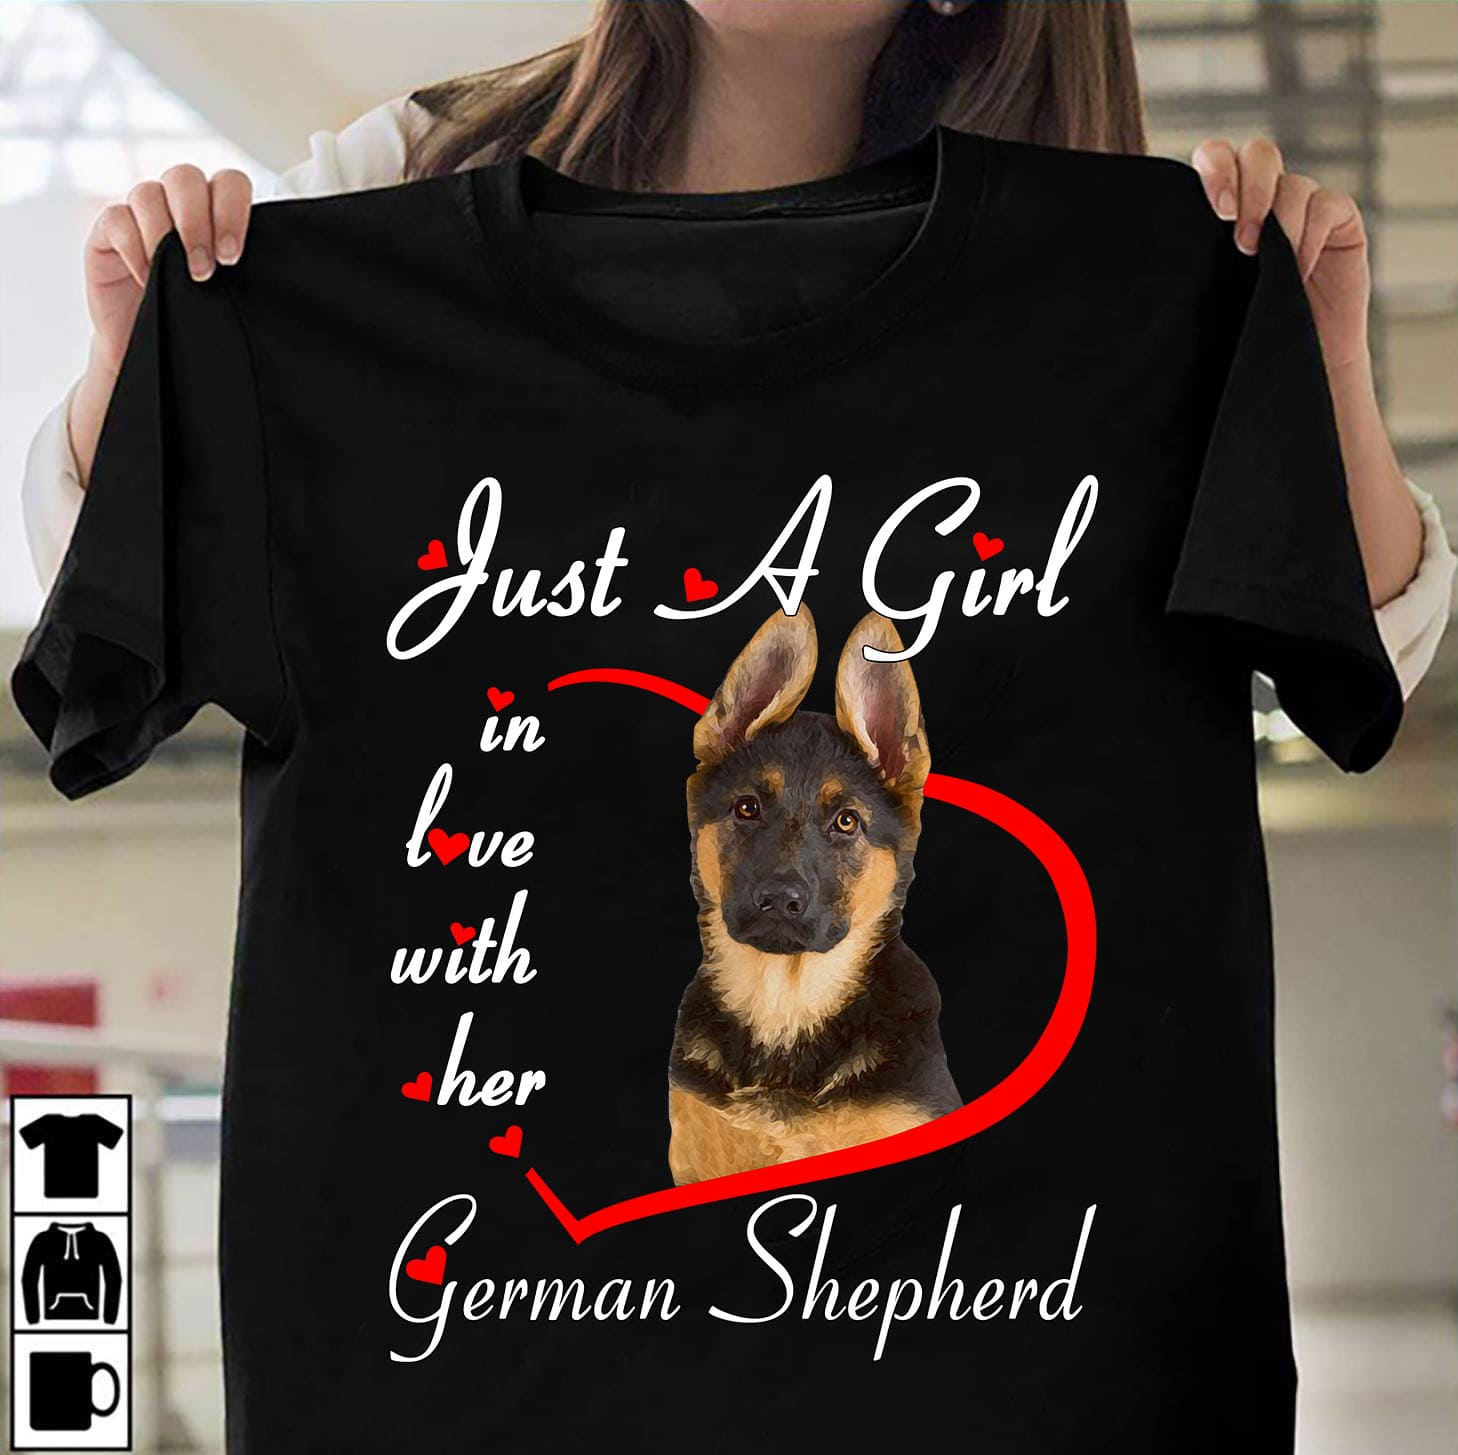 Just a girl in love with her German shepherd - Girl loves dogs, German Shepherd dog T-shirt